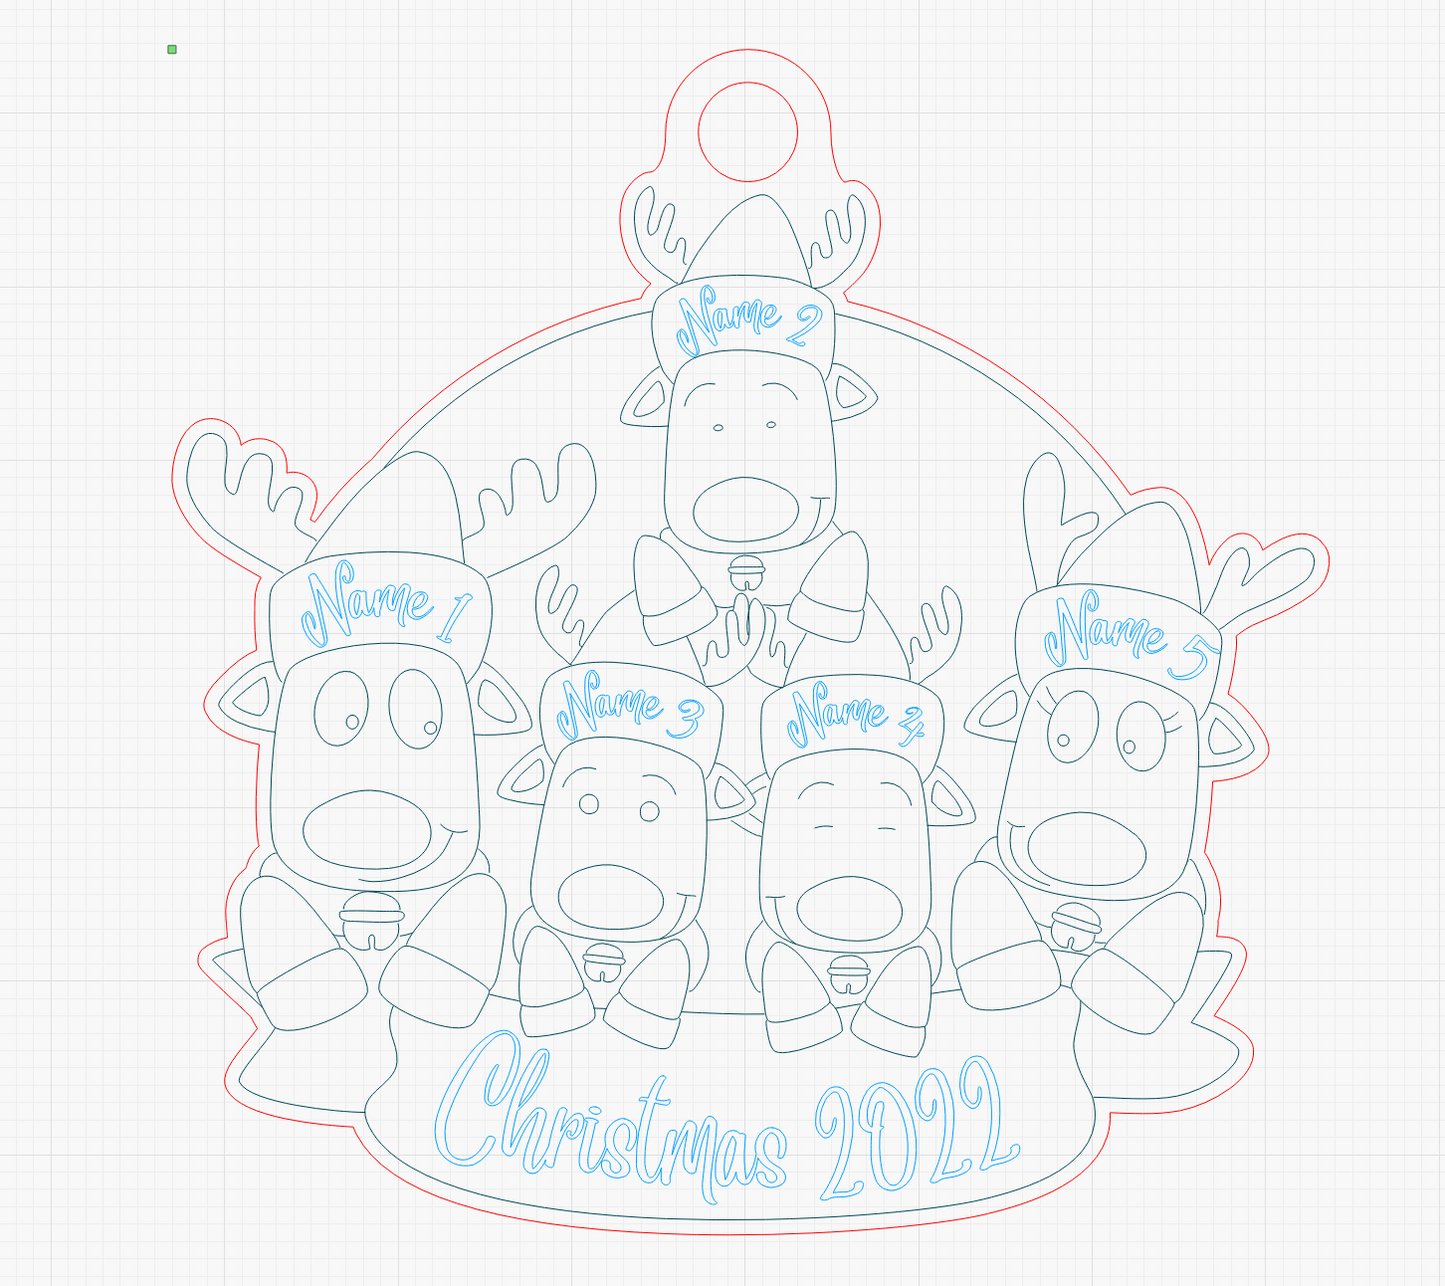 Personalized “Reindeer in Caps” Ornament (All Families including LGBTQ+ Families!)